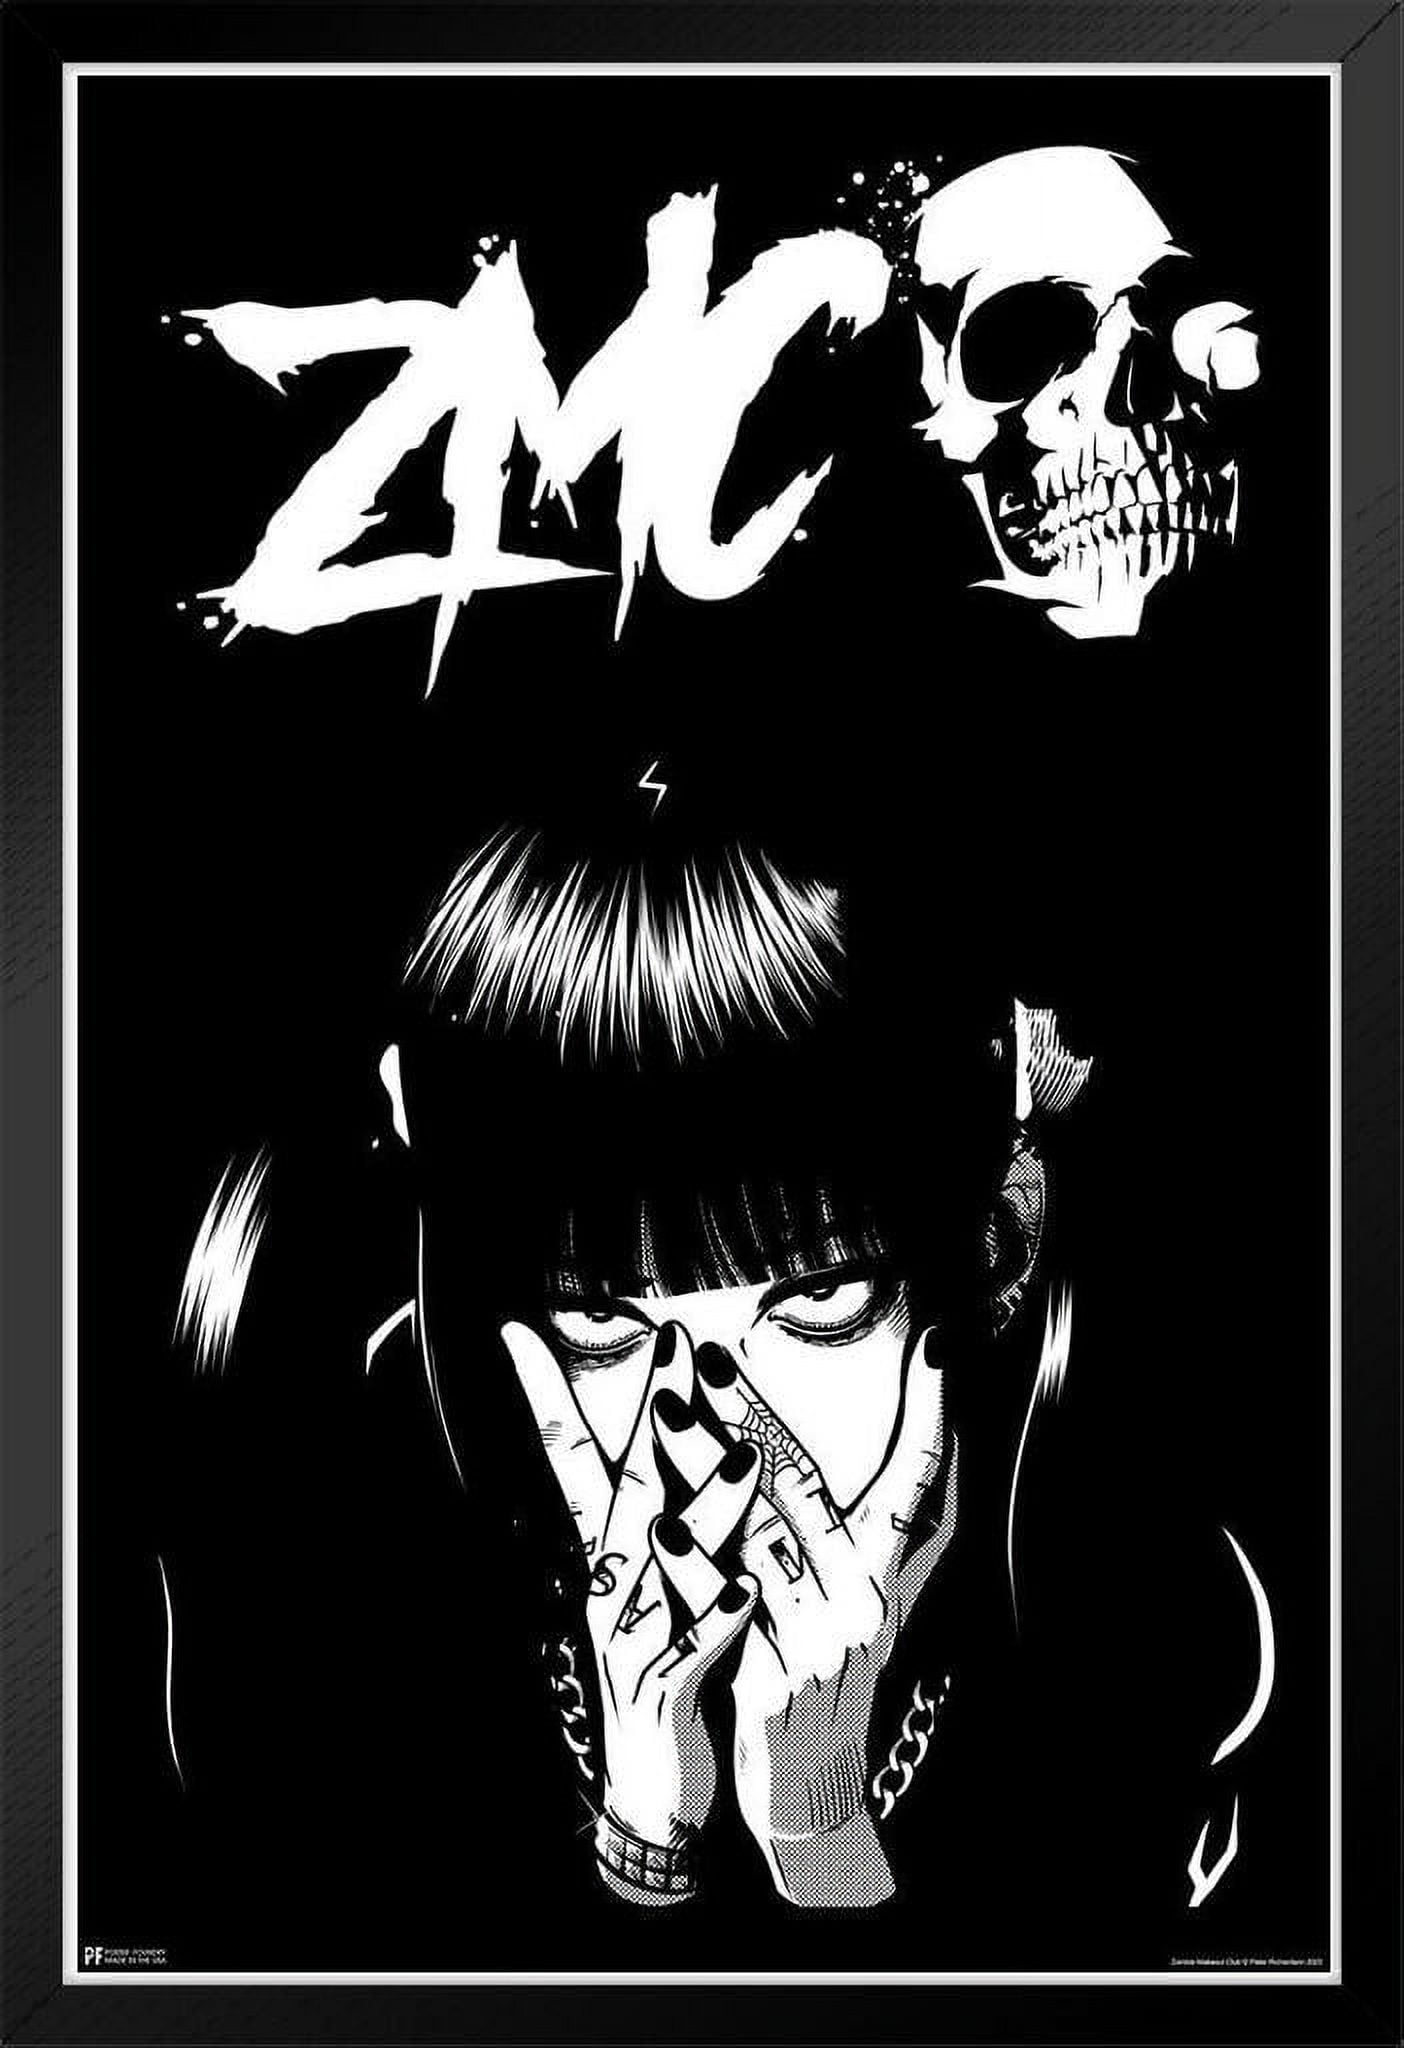 Zombie Makeout Club Anime Poster Merch Scary Posters Wall Decor Halloween  Decorations Home Bedroom Wall Art Gothic Girl ZMC Horror Skull Grunge Goth  Teen Room Cool Wall Decor Art Print Poster 24x36